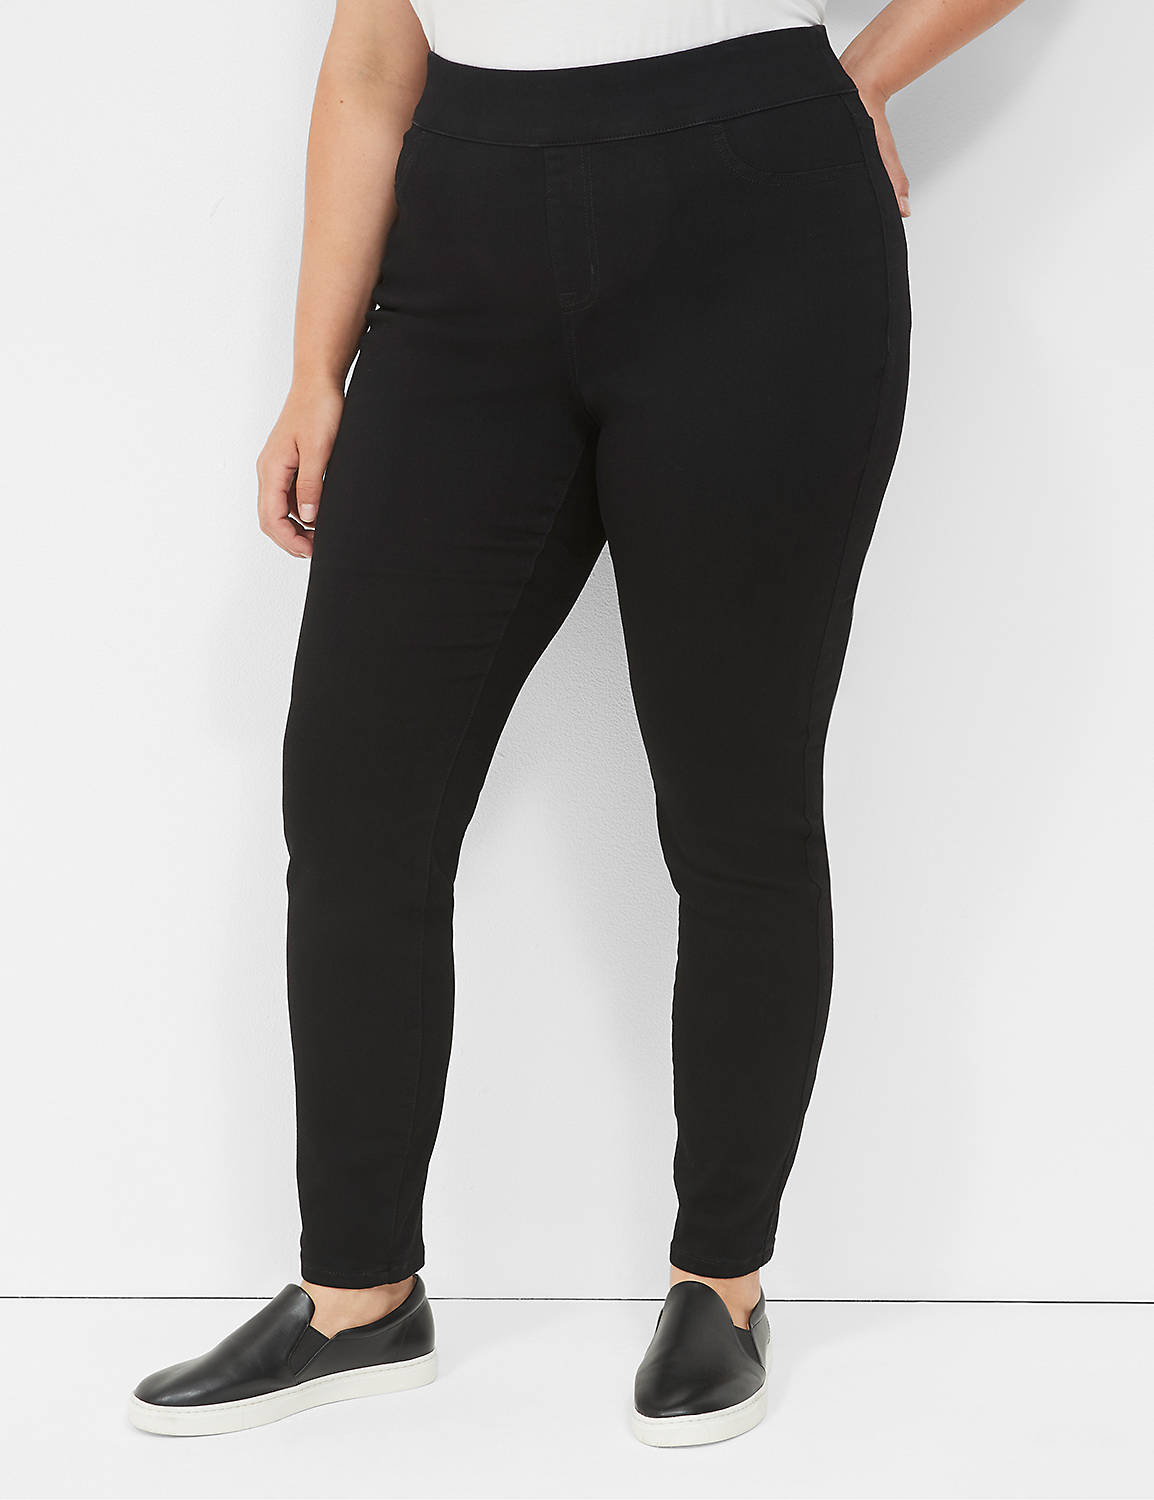 SIGNATURE HIGH RISE PULL ON JEGGING Product Image 1